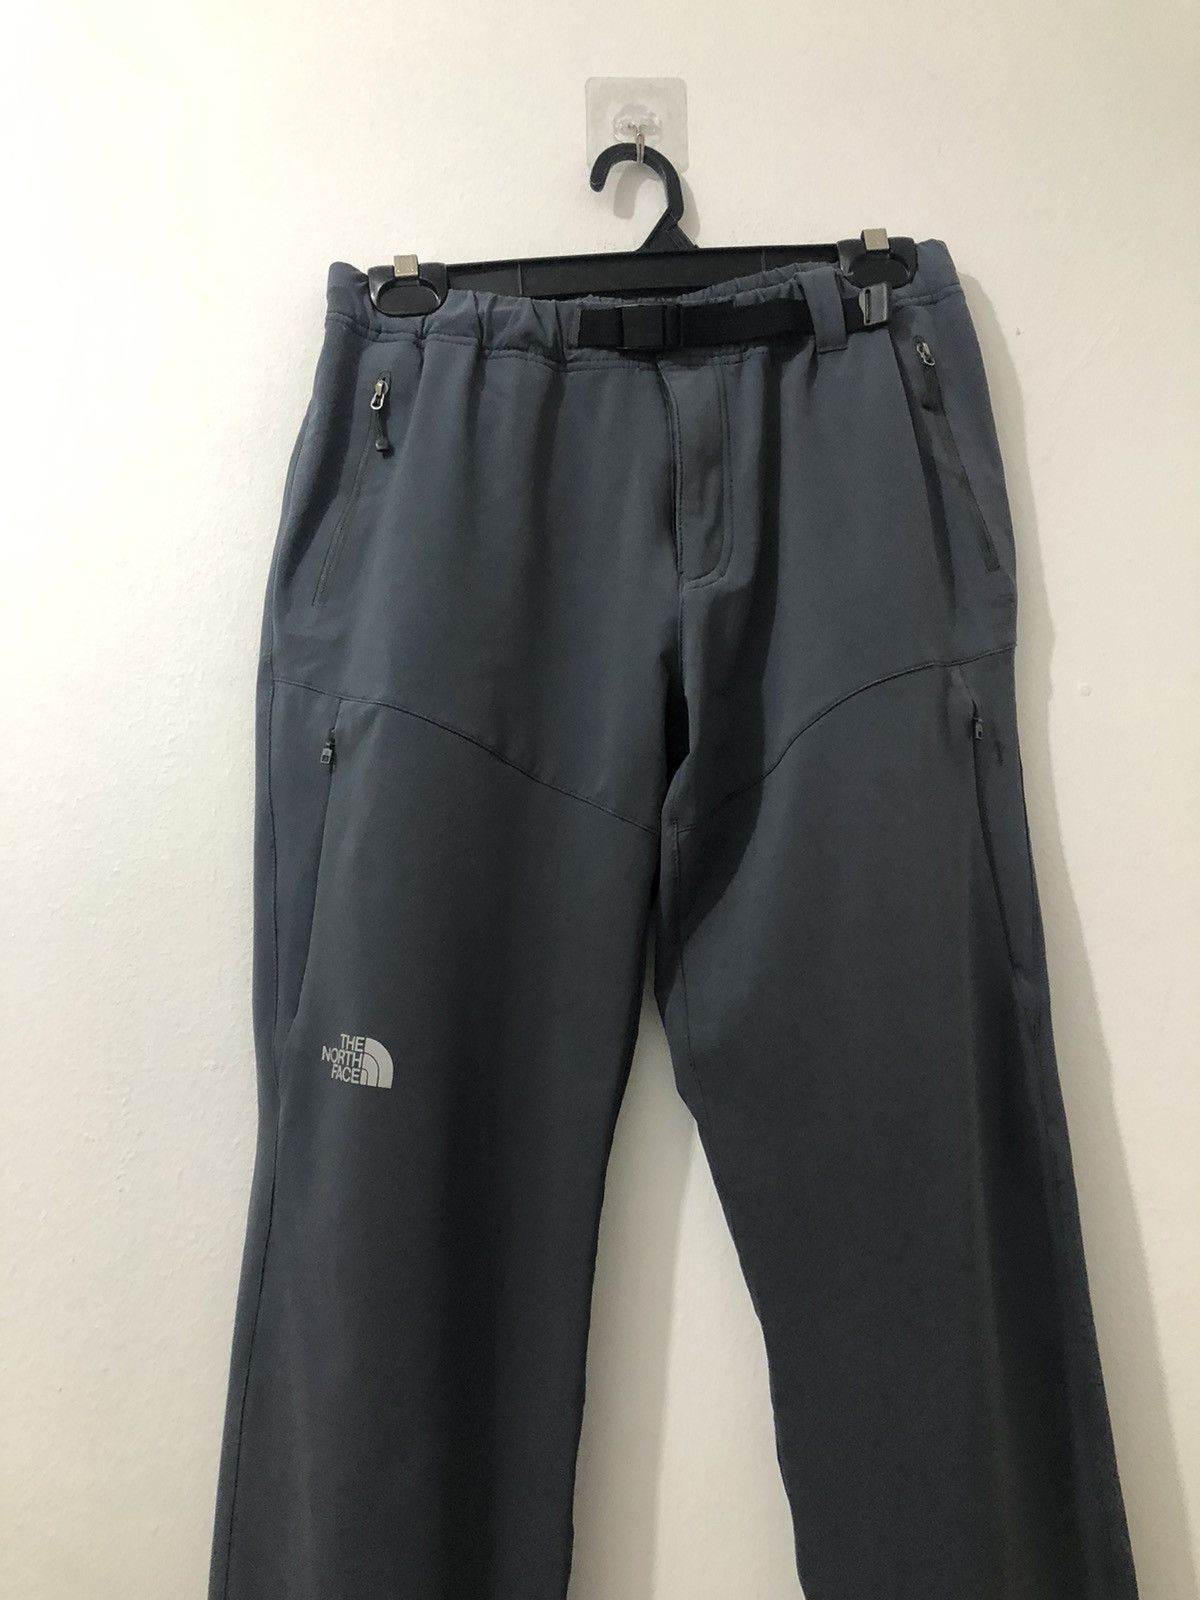 North face NTW57013 casual / hiking pant - 3